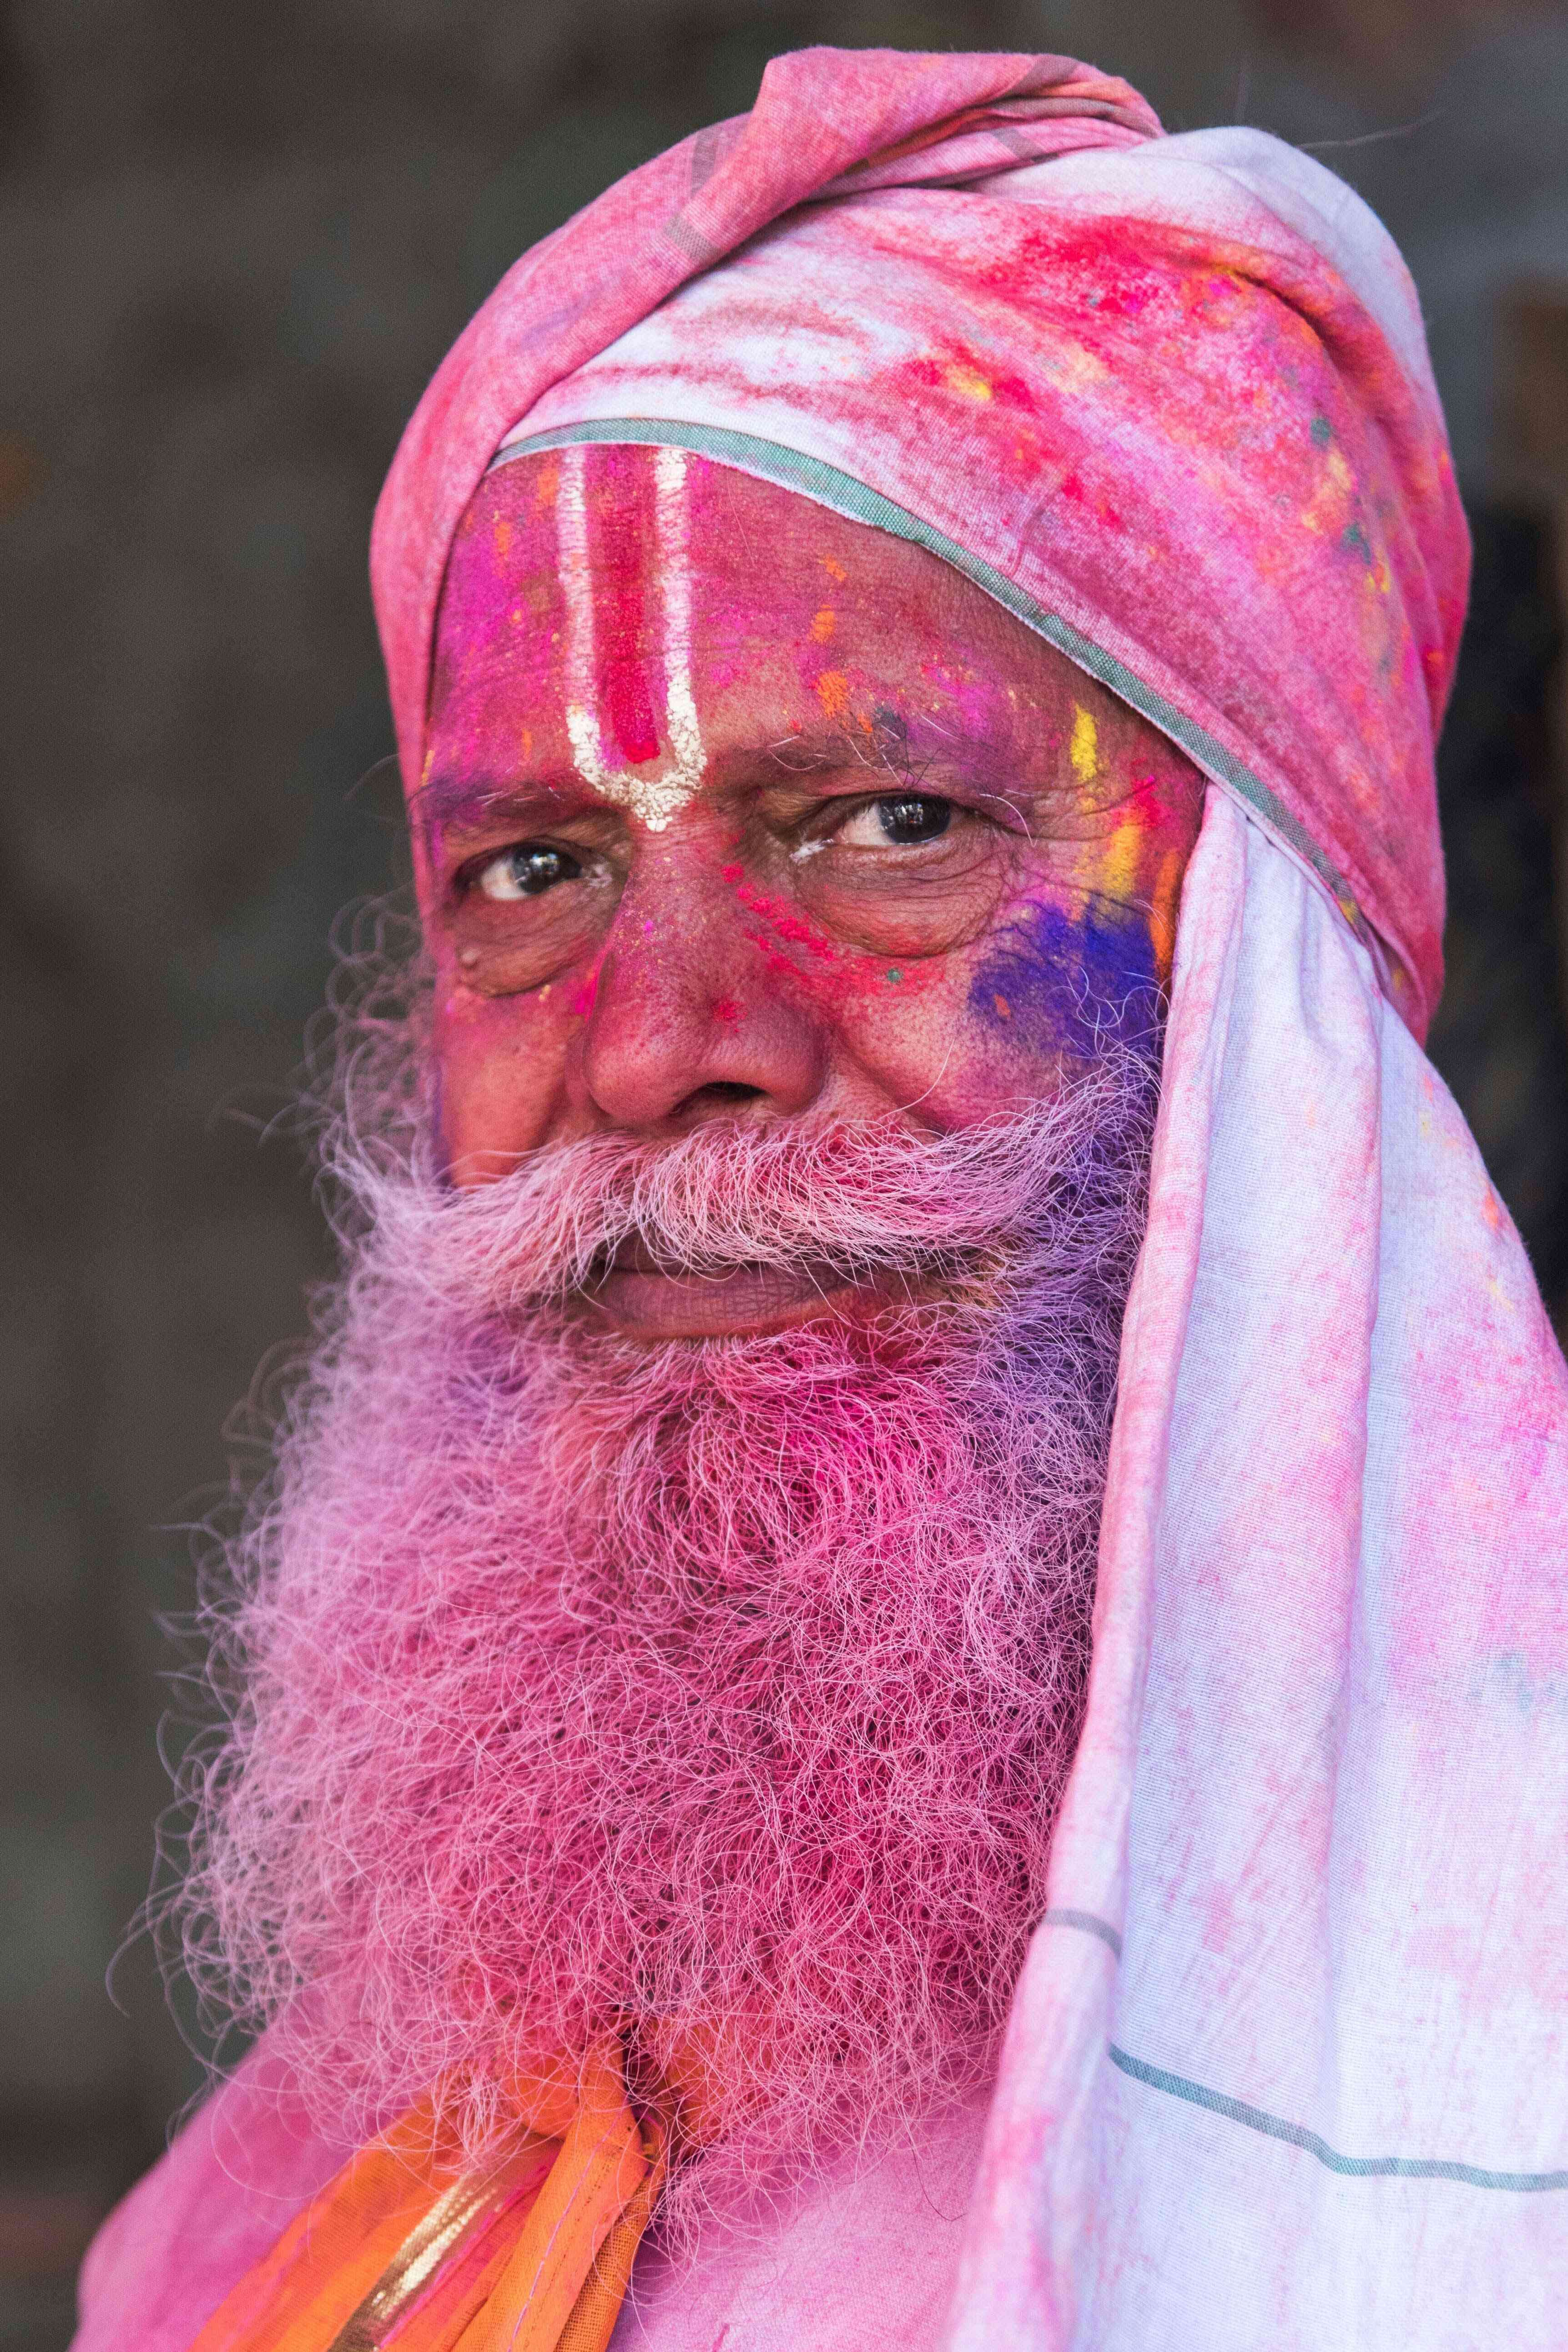 An Indian villager is smeared with colour powder during the Lathmar Holi festival at the Radha Rani temple in Barsana, some 130kms from New Delhi on March 16, 2016.  During the Lathmar Holi festival, the women of Barsana, the legendary hometown of Radha, consort of Hindu God Krishna, attack the men from Nandgaon, the hometown of Hindu God Krishna, with wooden sticks in response to their efforts to put color on them. / AFP PHOTO / François Xavier MARIT